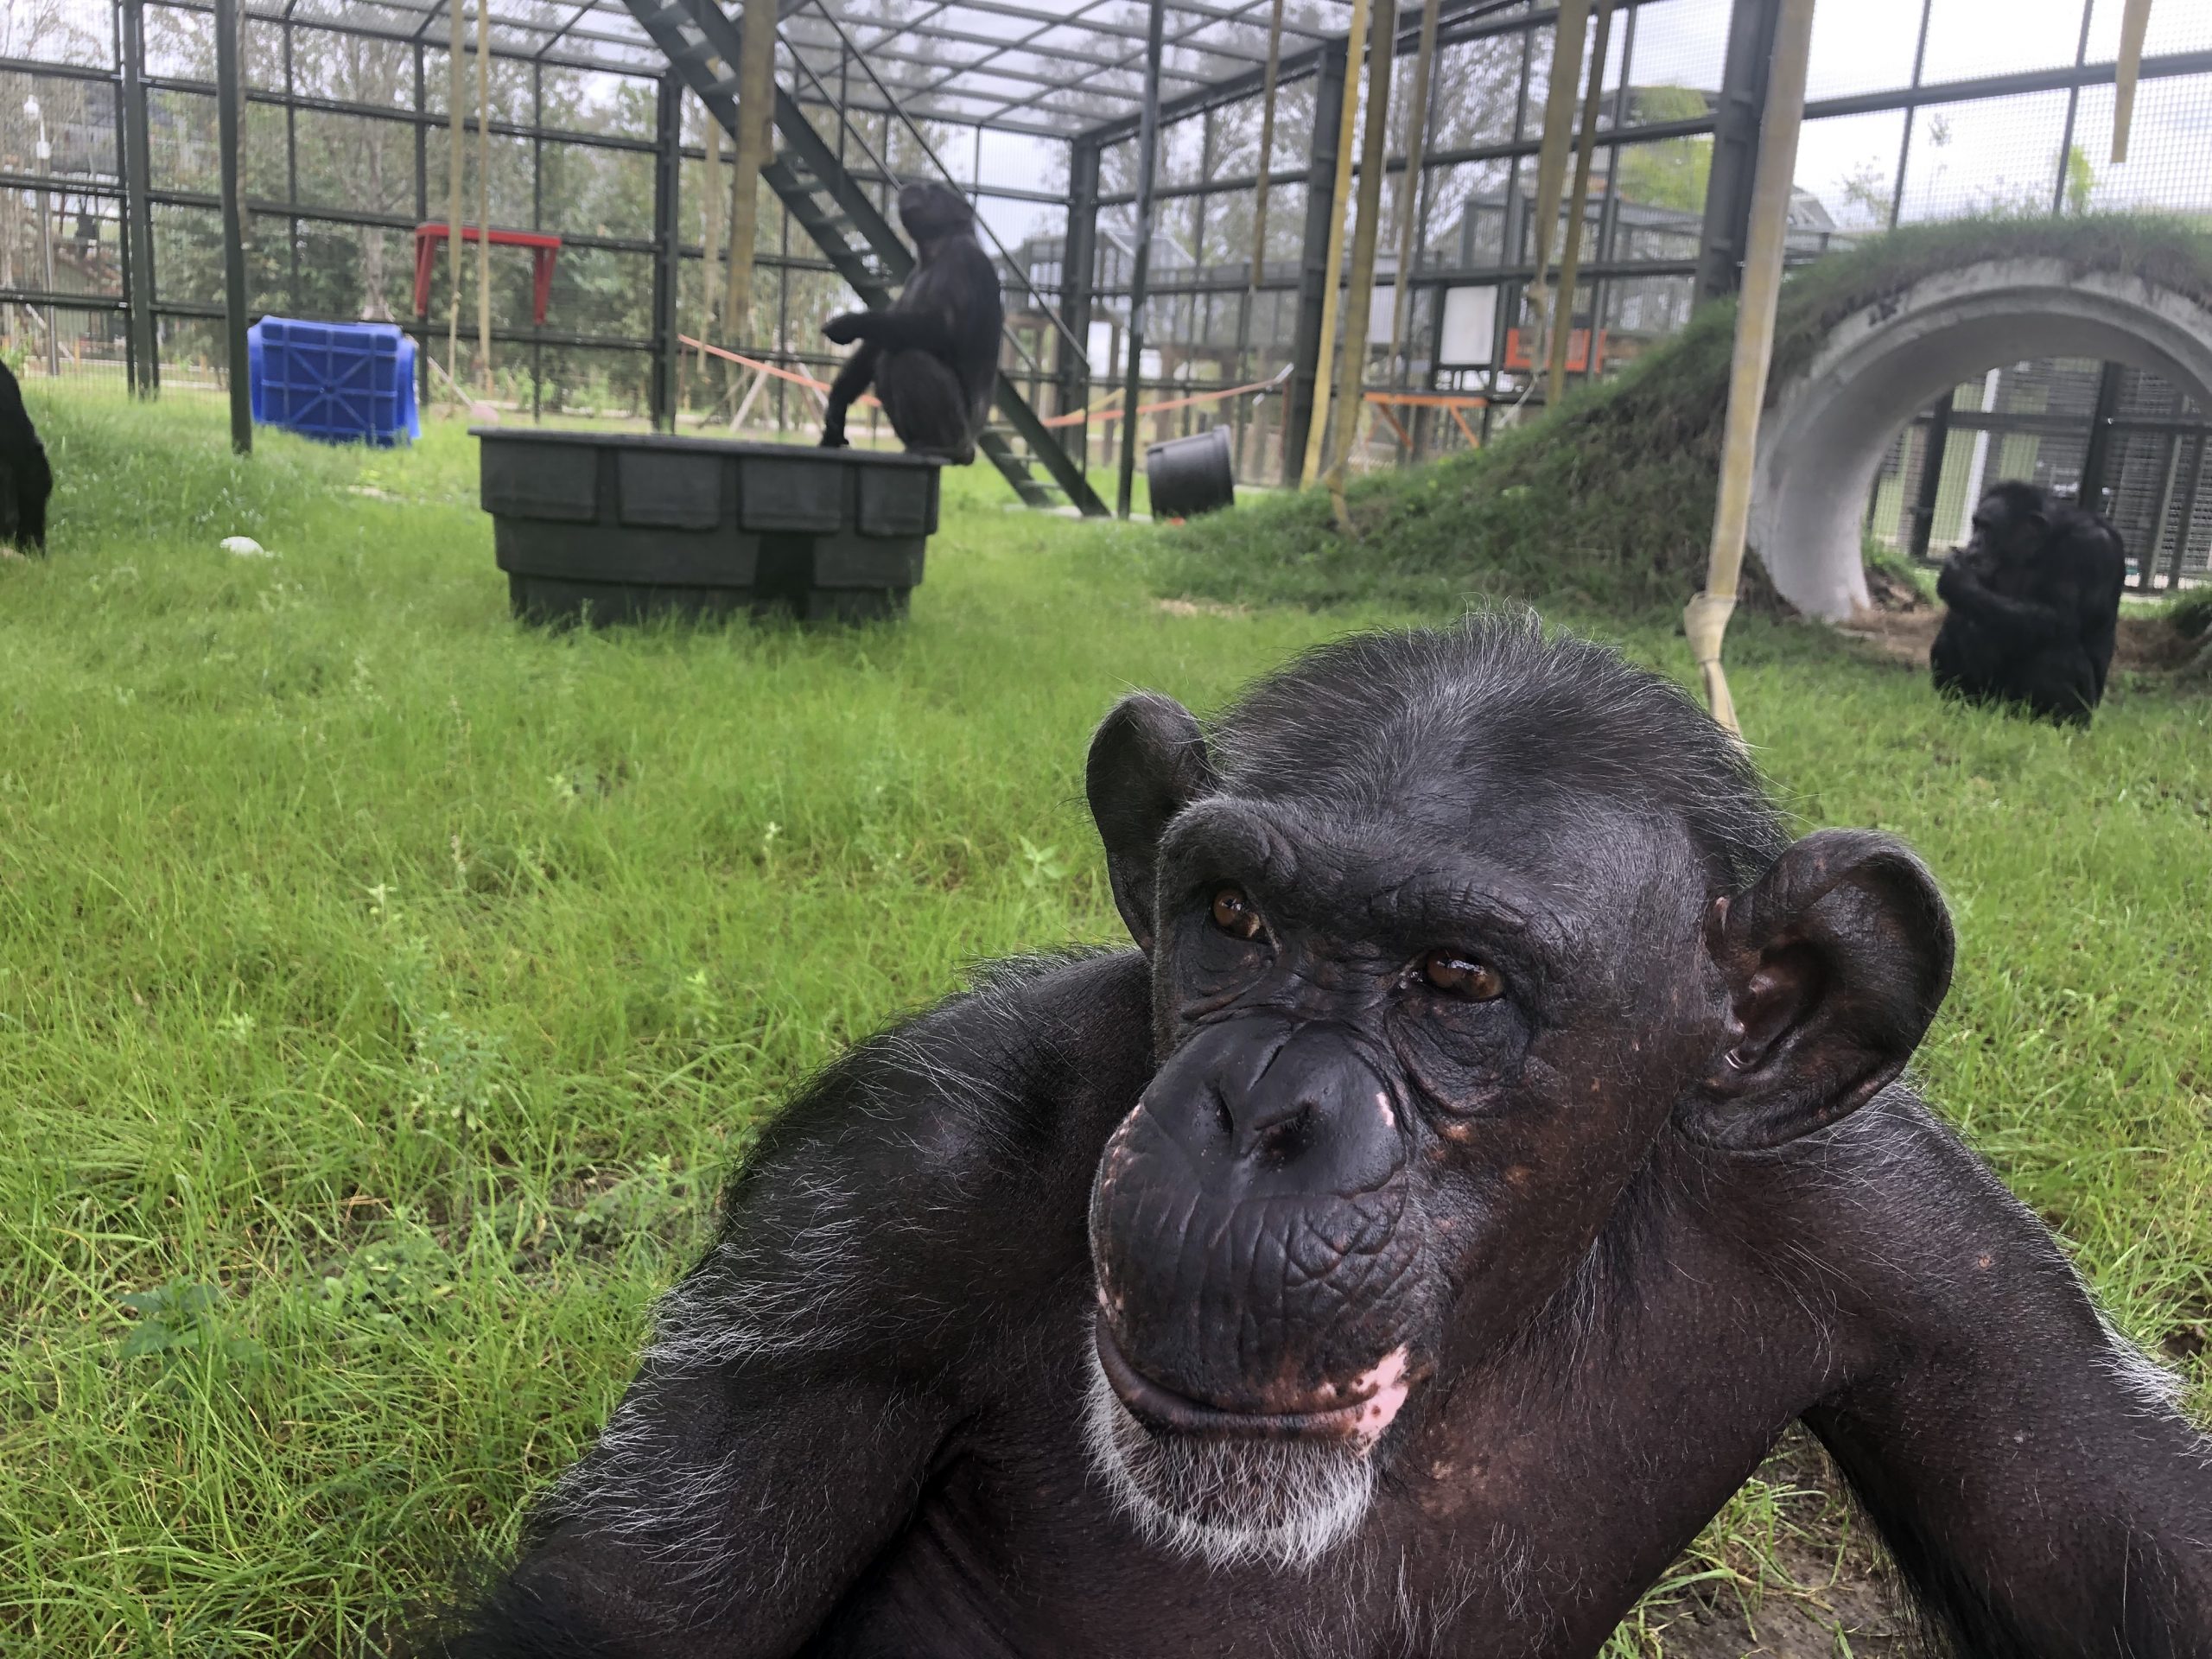 Chimpanzees in a cage with grass and things to play with.